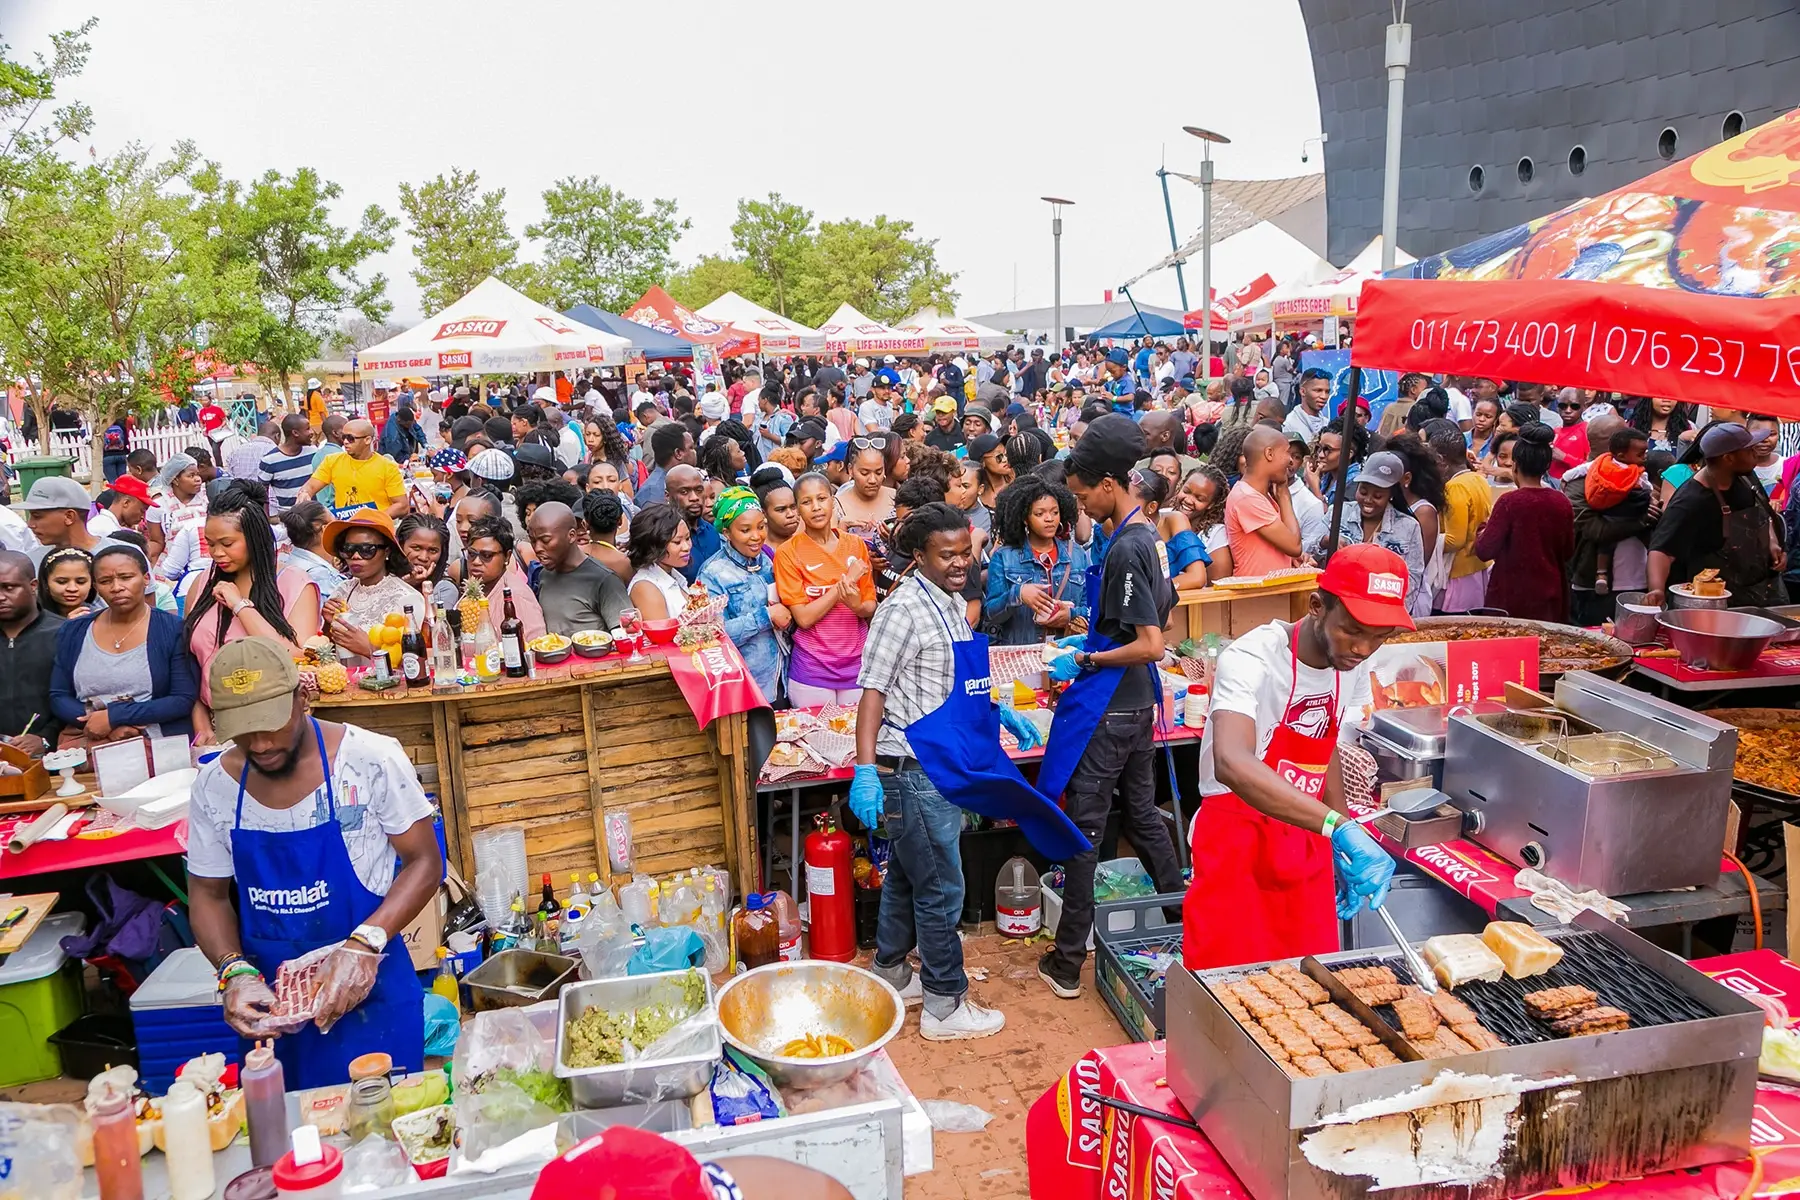 Diverse group of South Africans at an open-air food festival